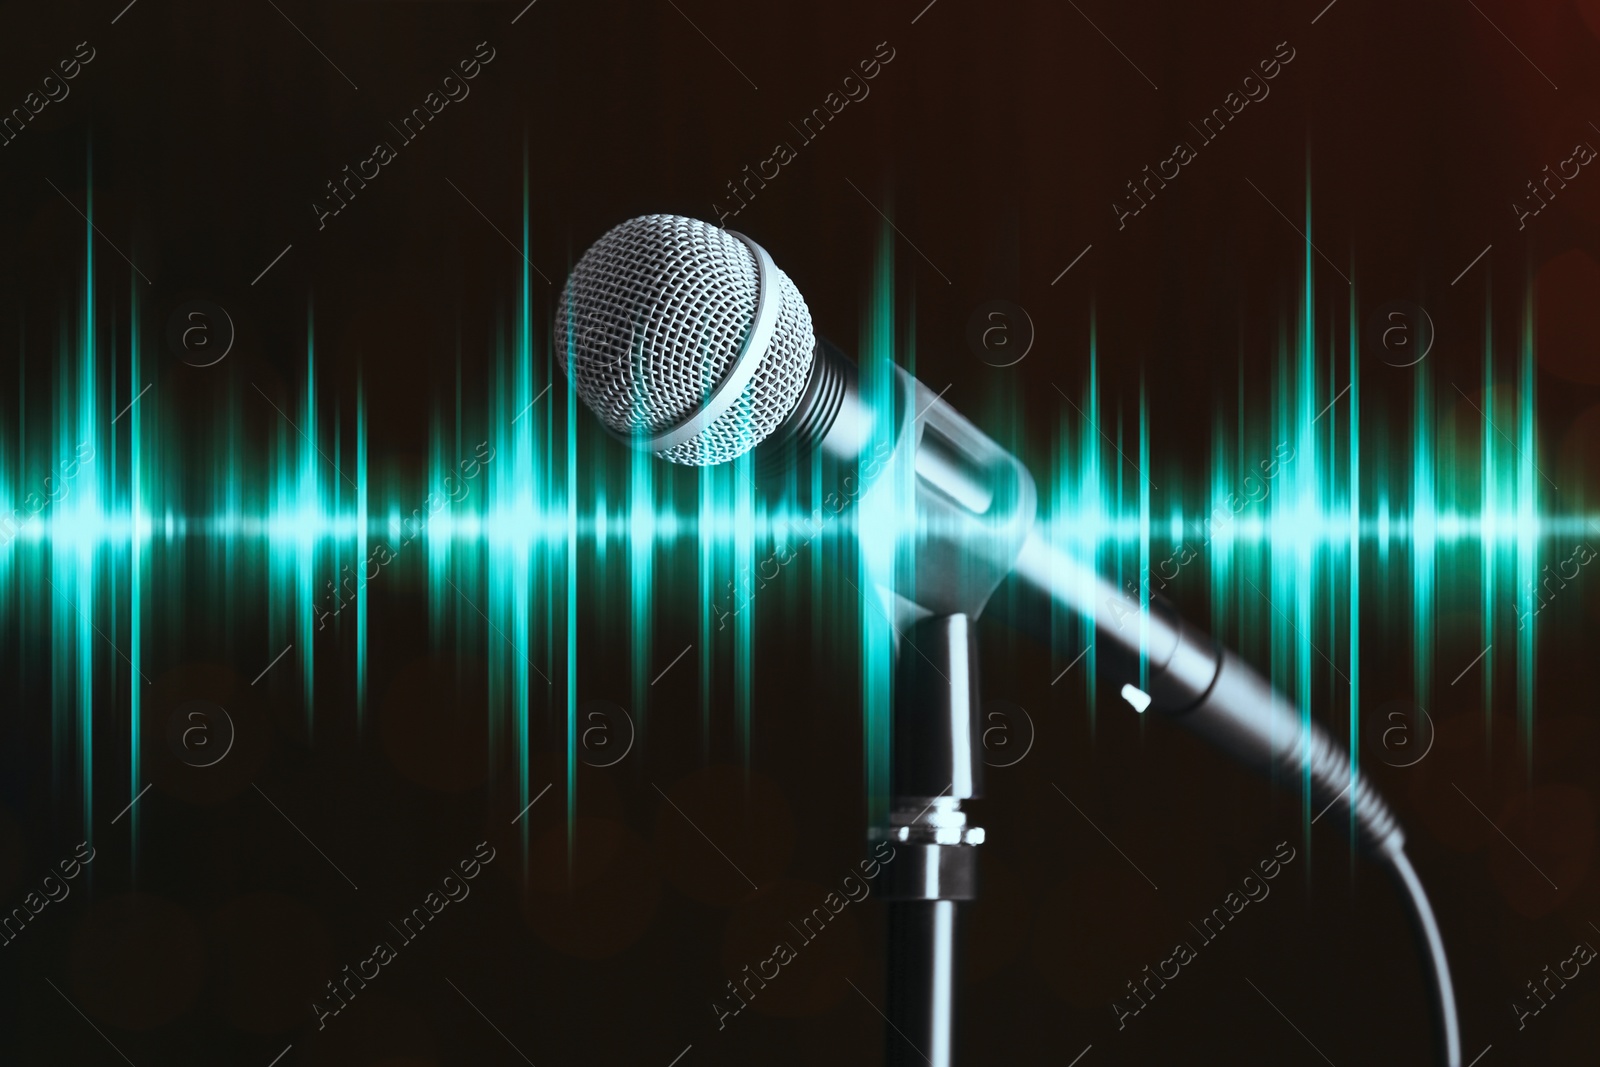 Image of Microphone and radio wave on dark background